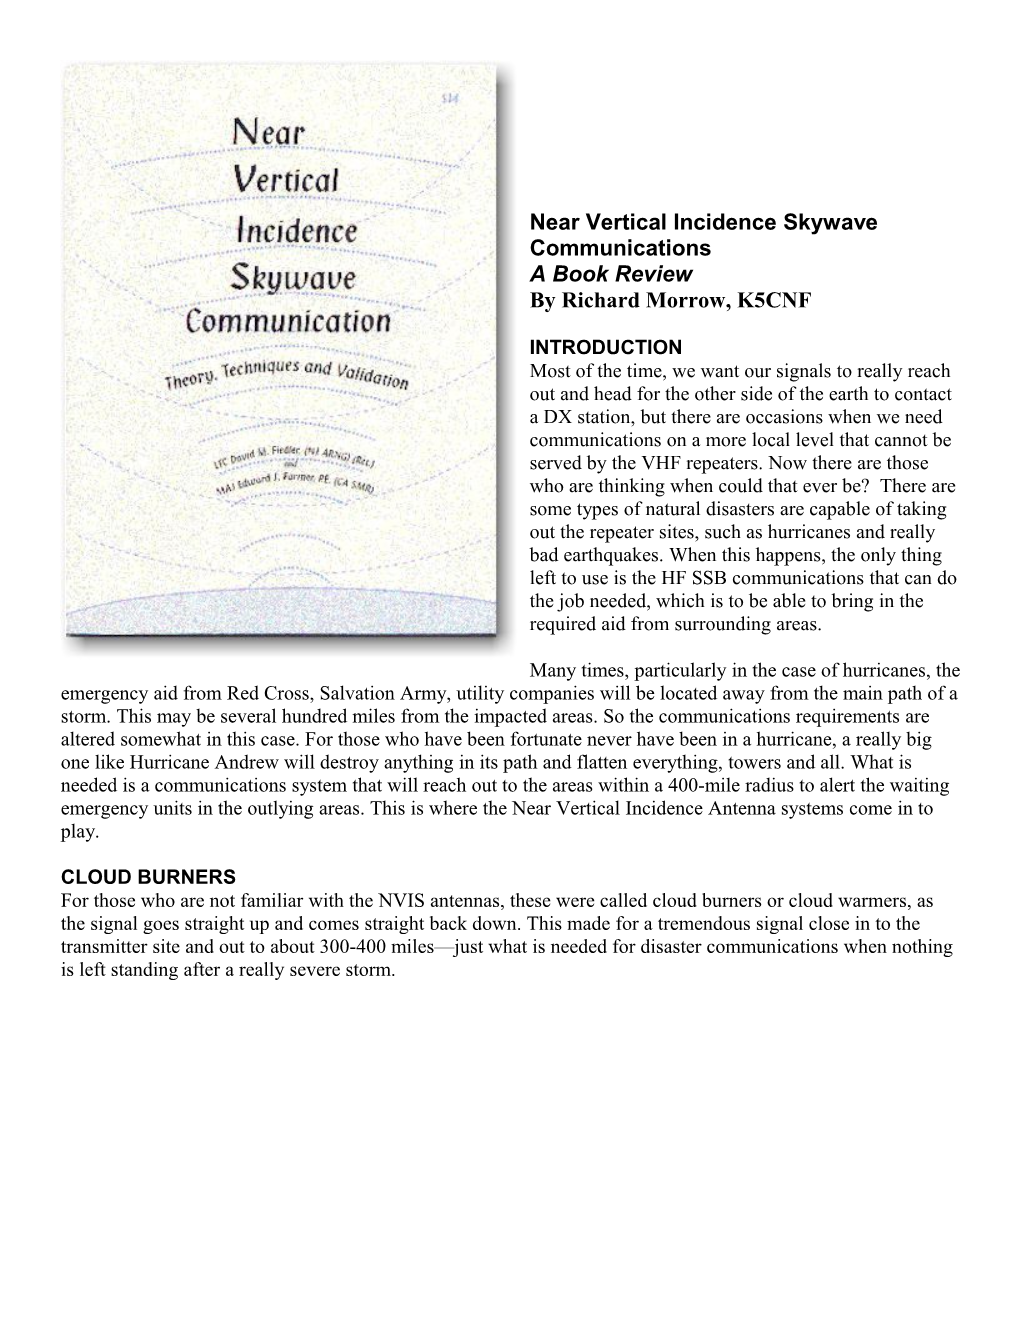 Near Vertical Incidence Skywave Communications a Book Review by Richard Morrow, K5CNF